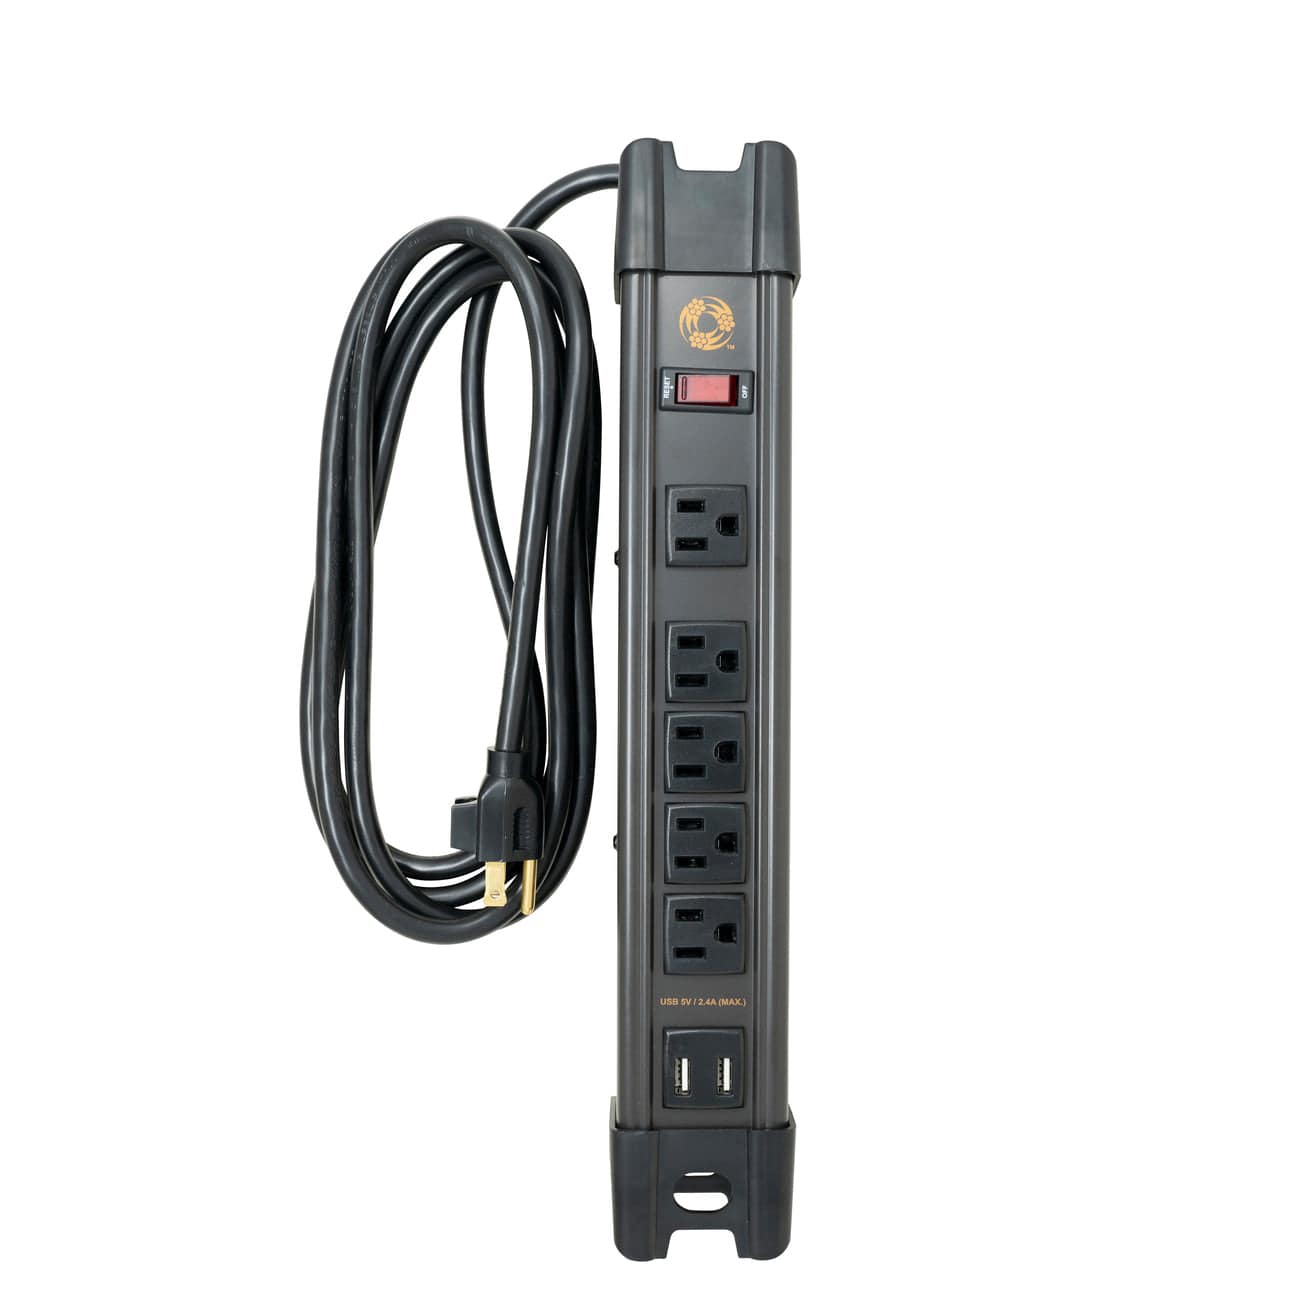 Southwire 5127 Heavy-Duty Magnetic Power Strip W/ 2.4USB, 5 Outlet, 8' Cord